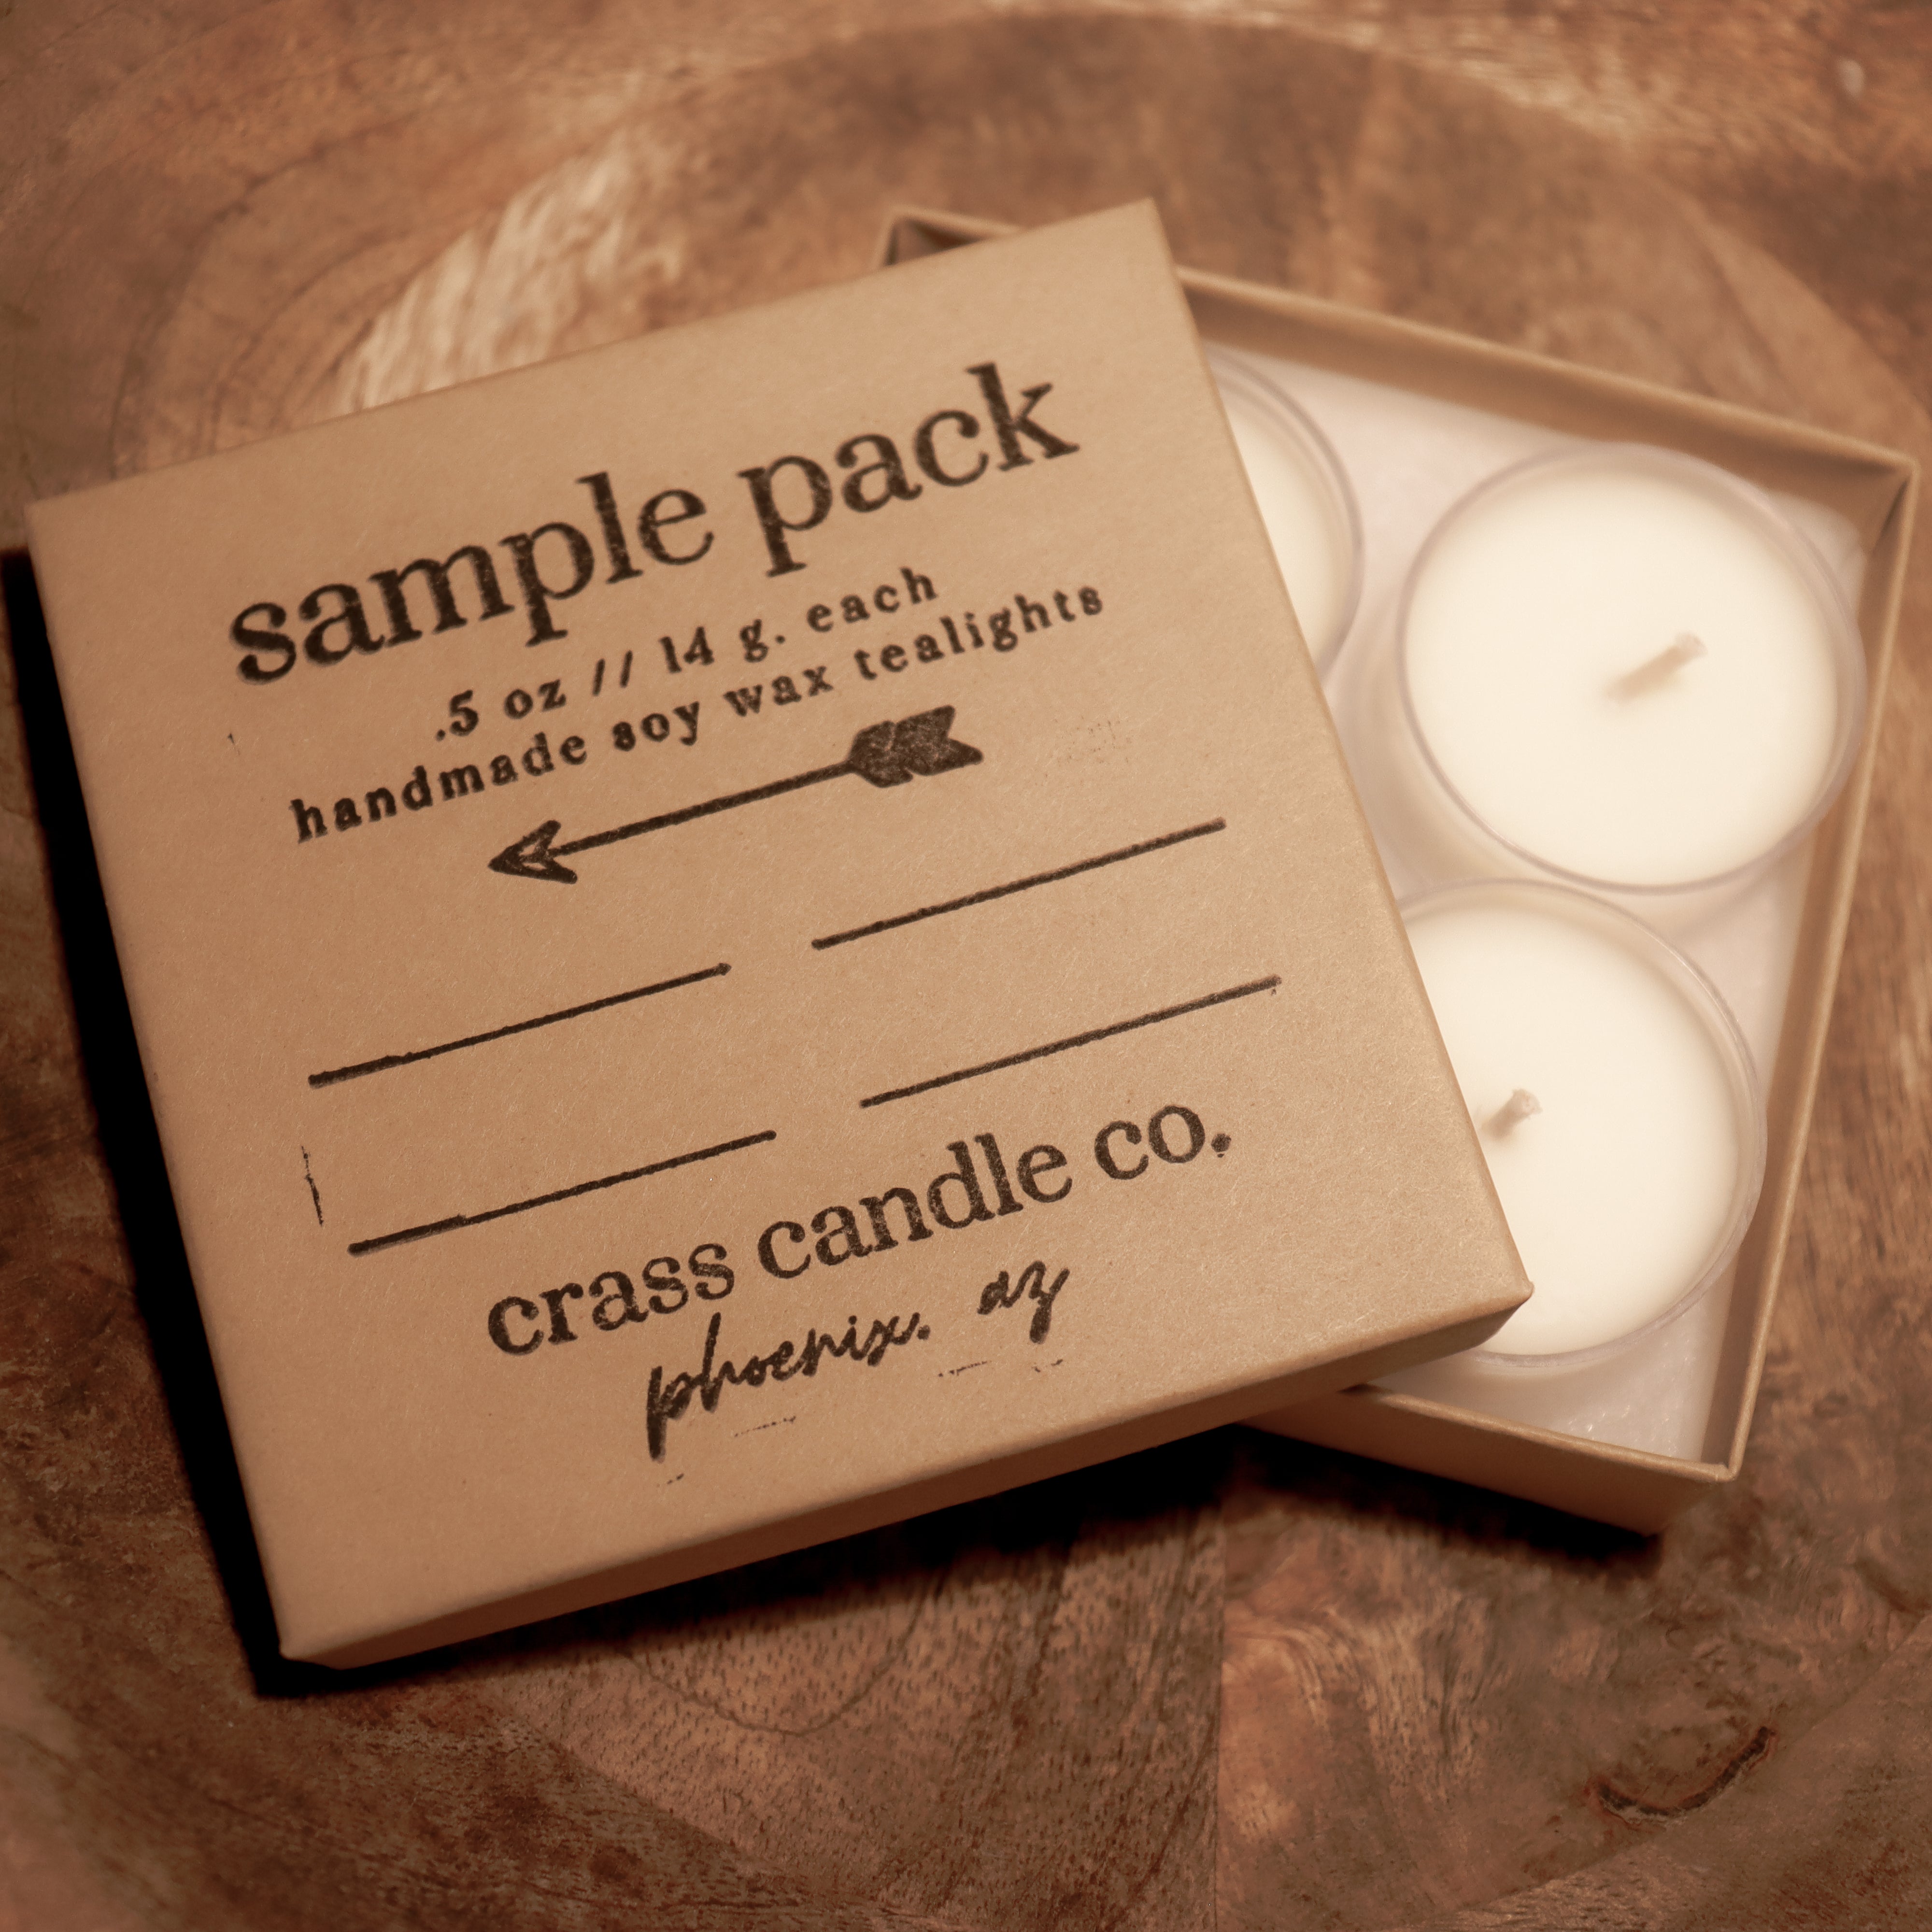 7 oz. Candle Refill – Crass Candle Co.